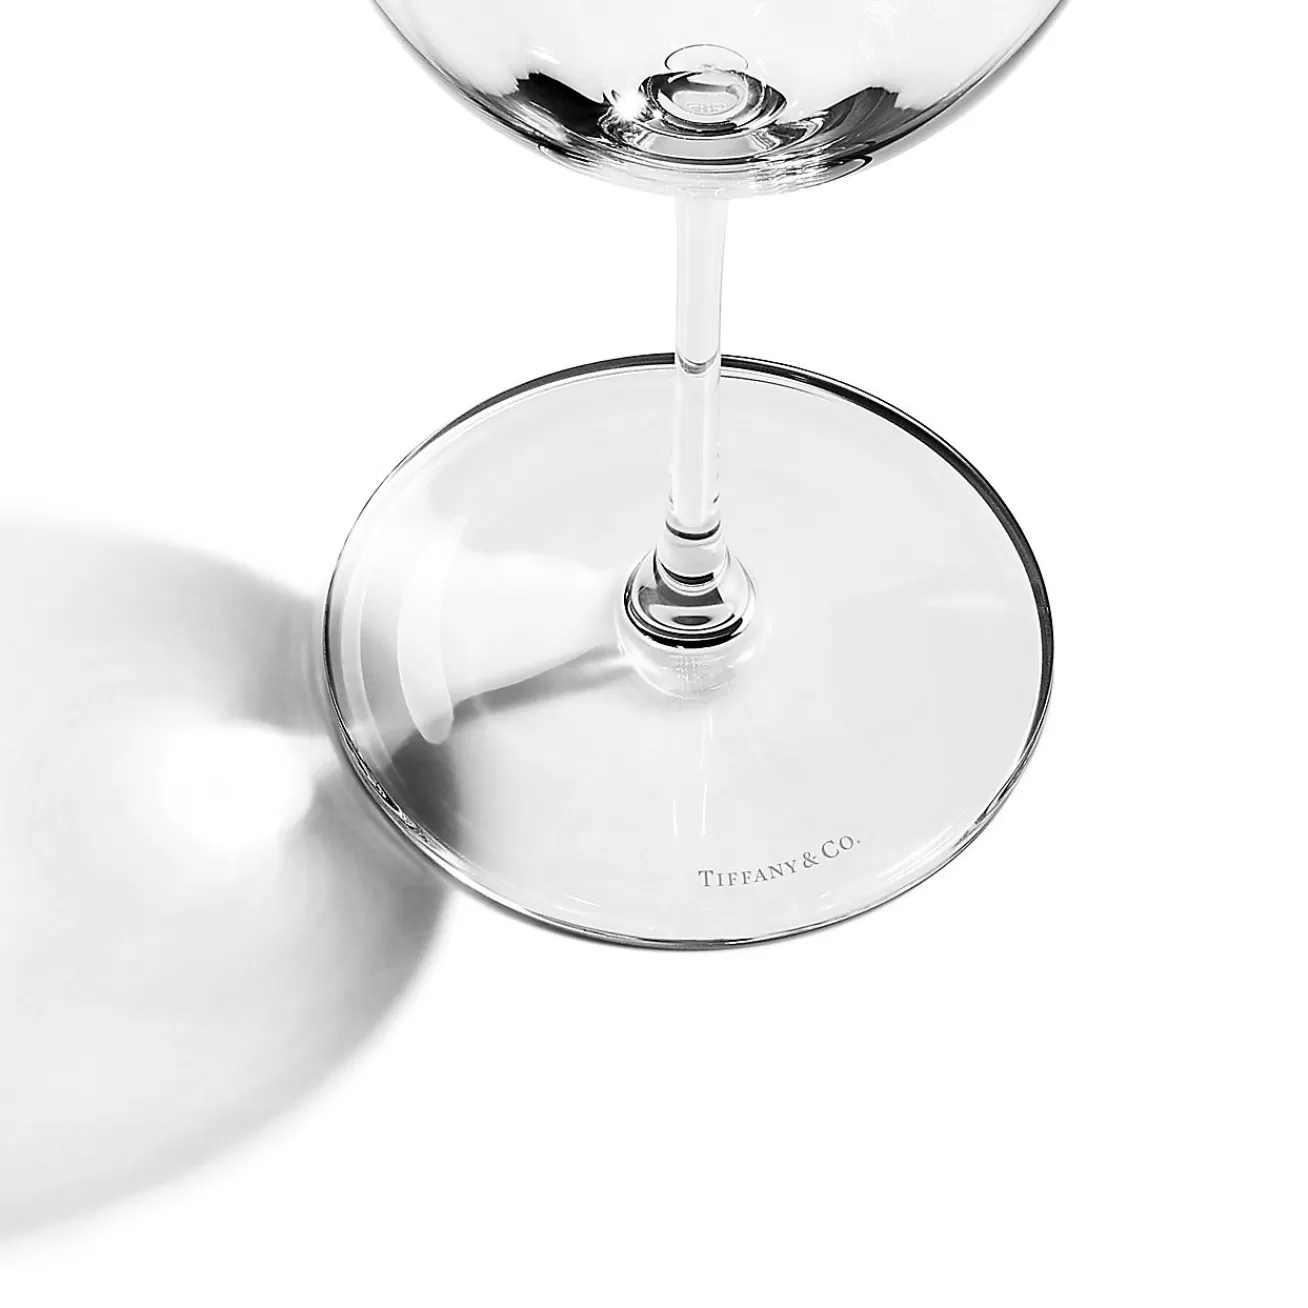 Tiffany & Co. Tiffany Home Essentials Pinot Noir Glasses in Crystal Glass, Set of Two | ^ Him | Gifts for Him